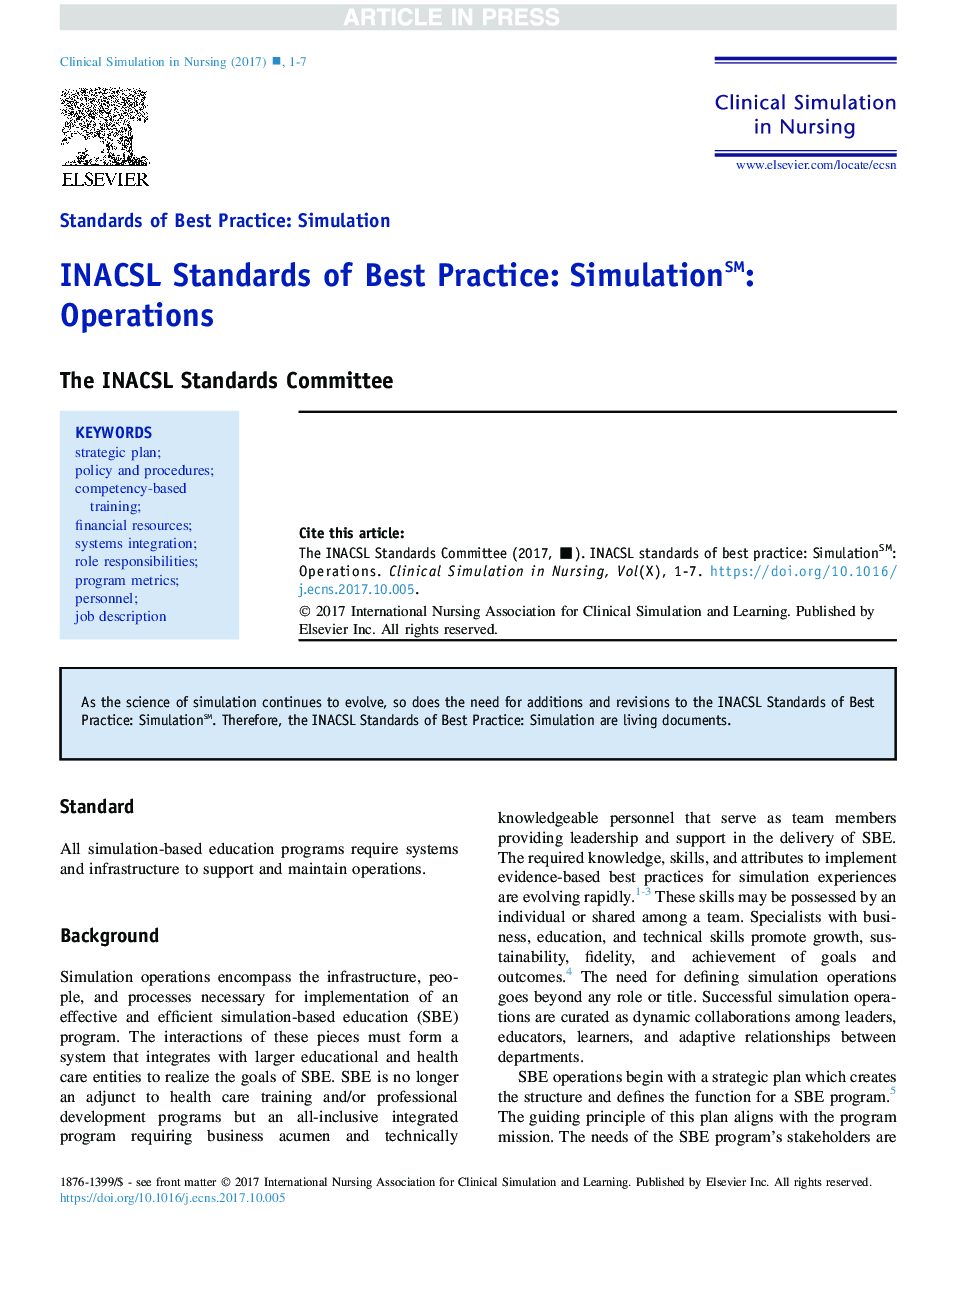 INACSL Standards of Best Practice: Simulationsm: Operations